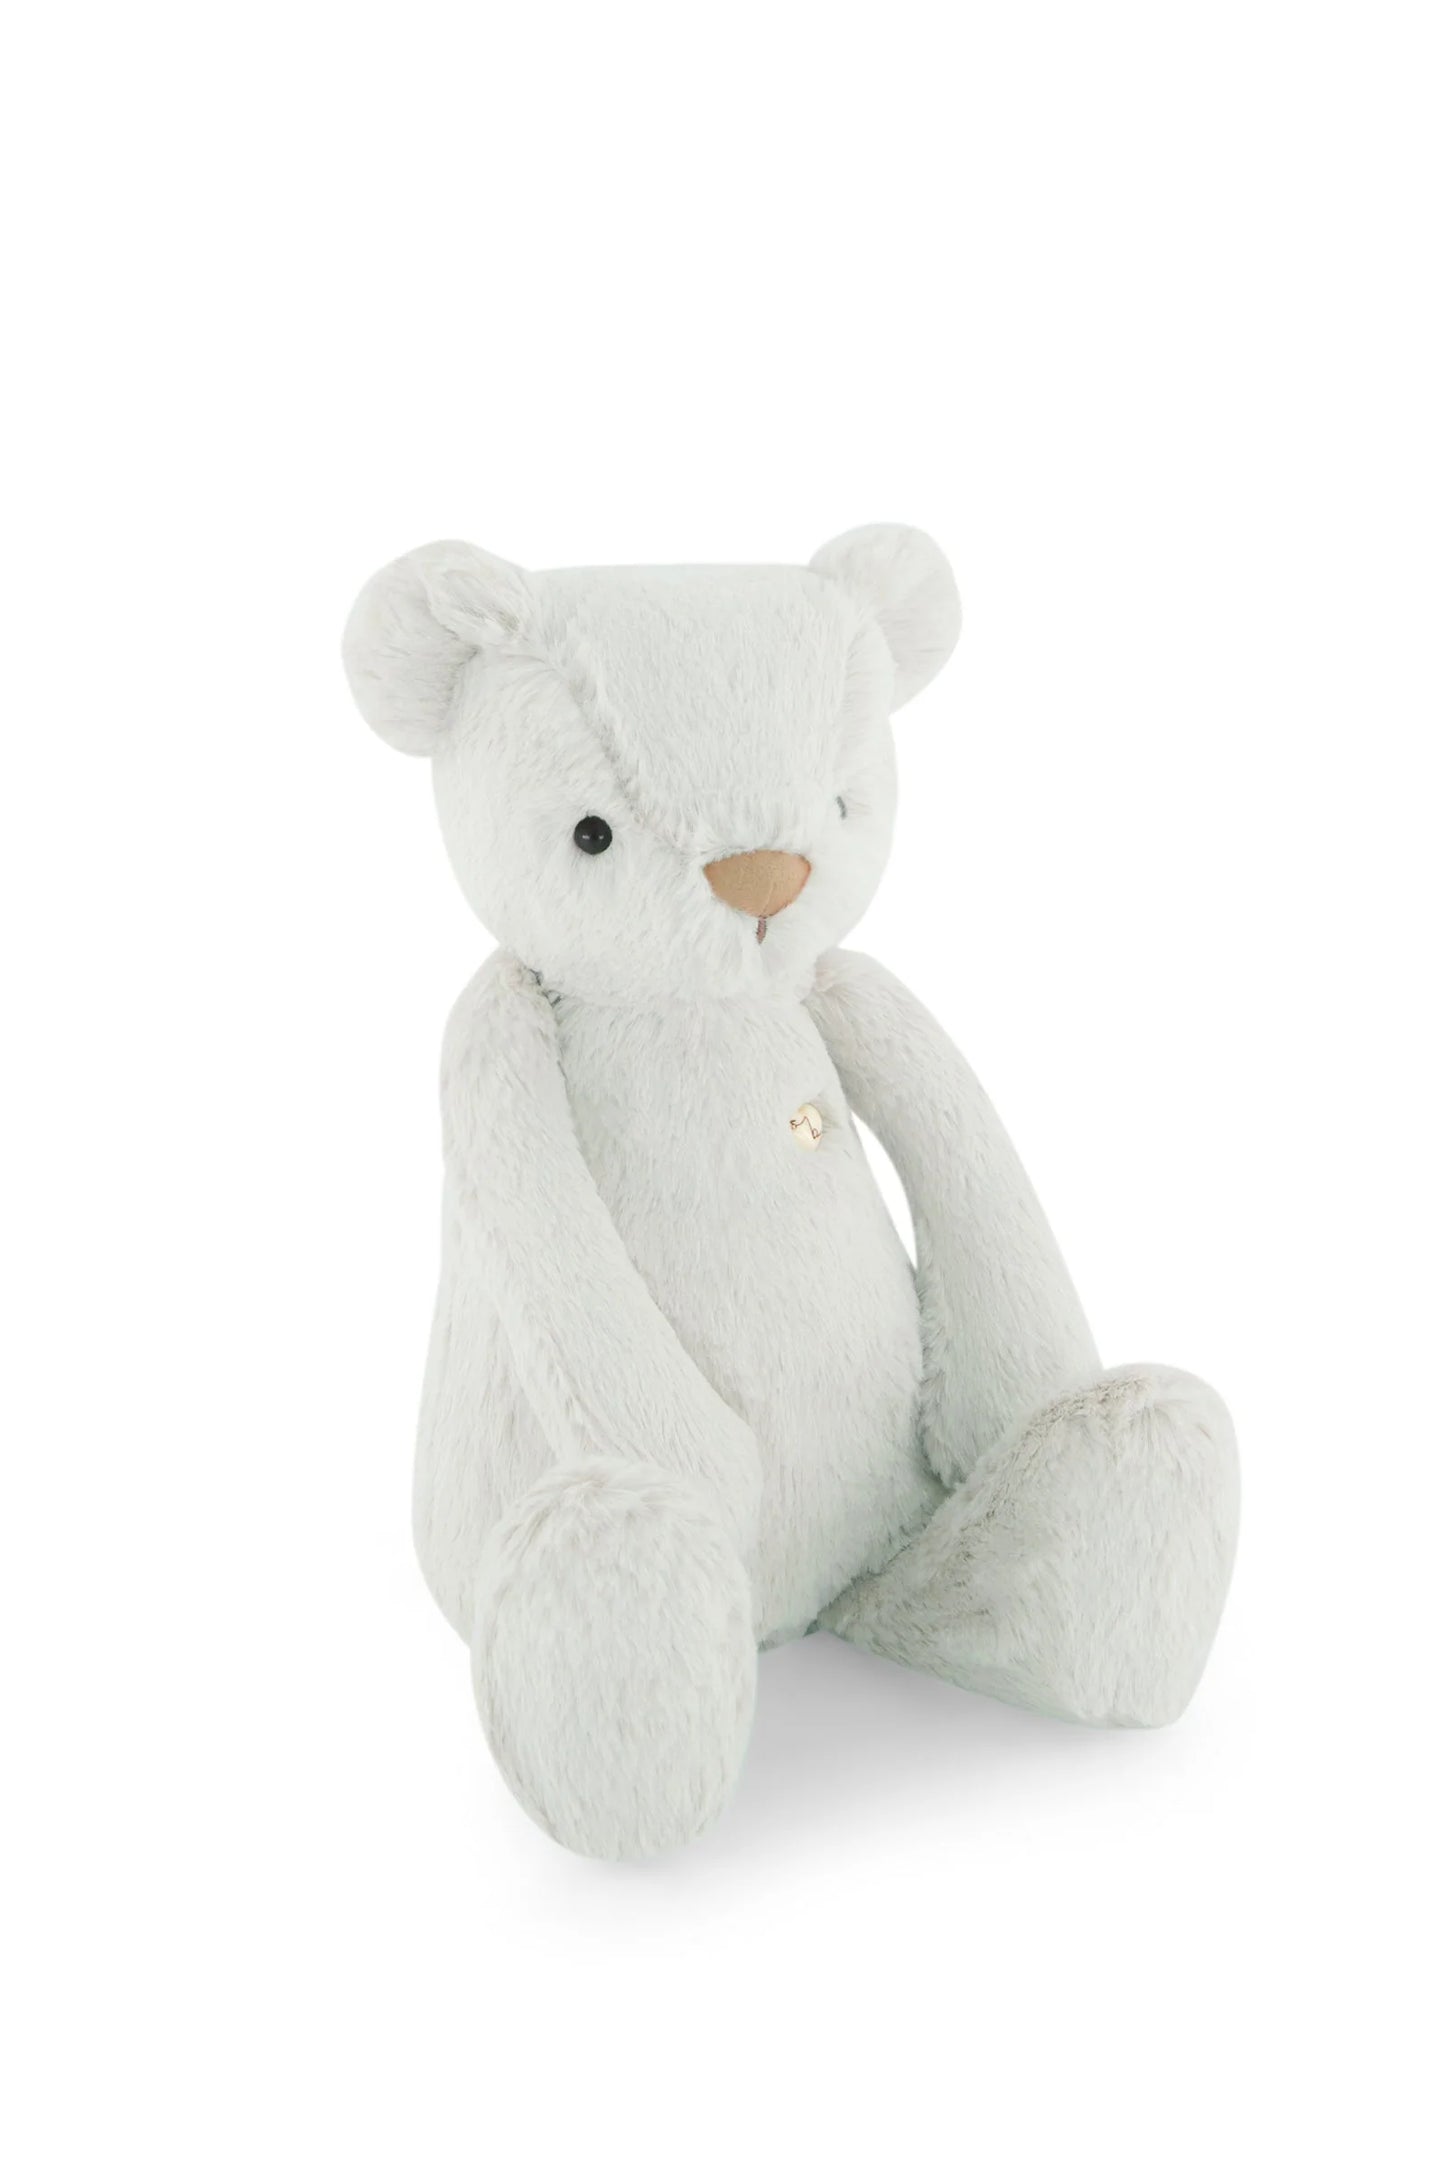 Jamie Kay Snuggle Bunnies  - George the Bear (Willow - Size Options Available)